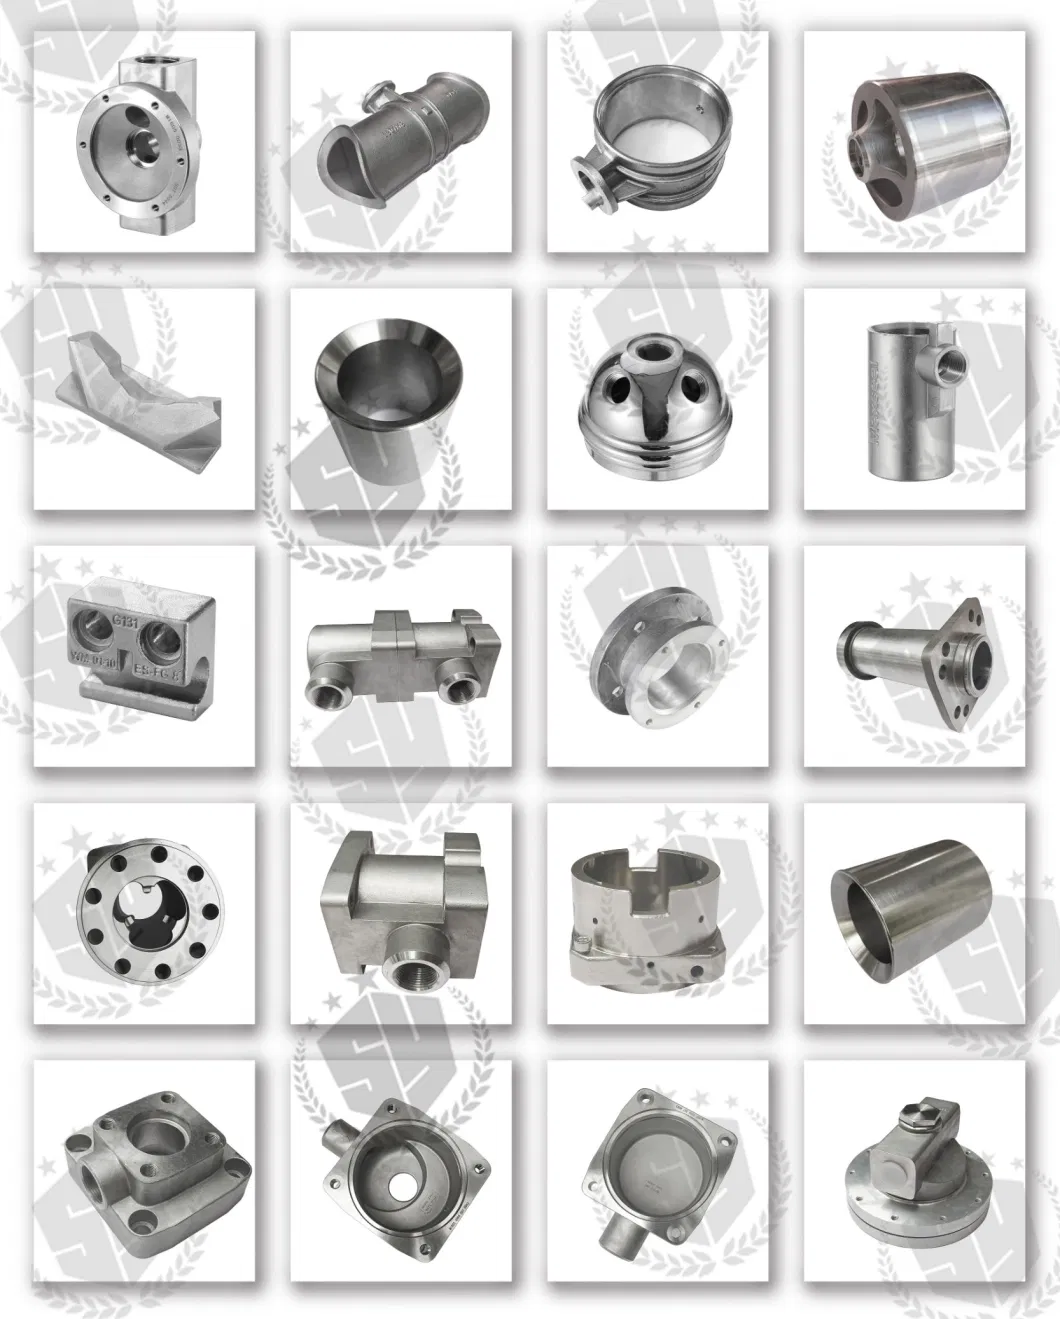 OEM Customized ASTM A747 CB7cu-1 Stainless Steel Raw Material Investment Casting Spare Parts for Mineral and Energy Industrial Equipment